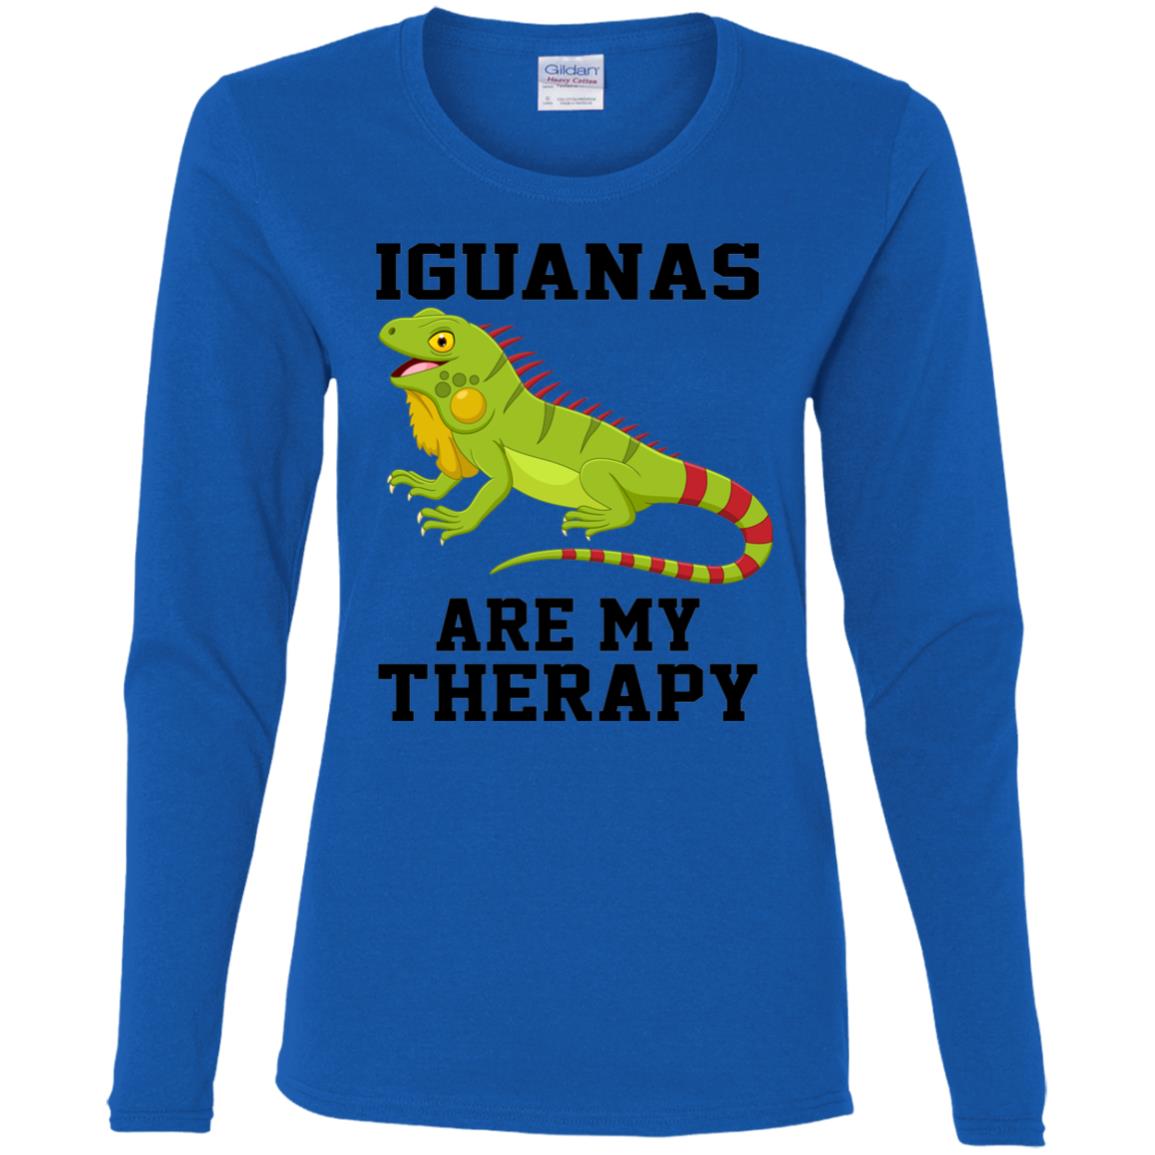 Iguanas Are My Therapy - Women's Long Sleeved T-Shirt